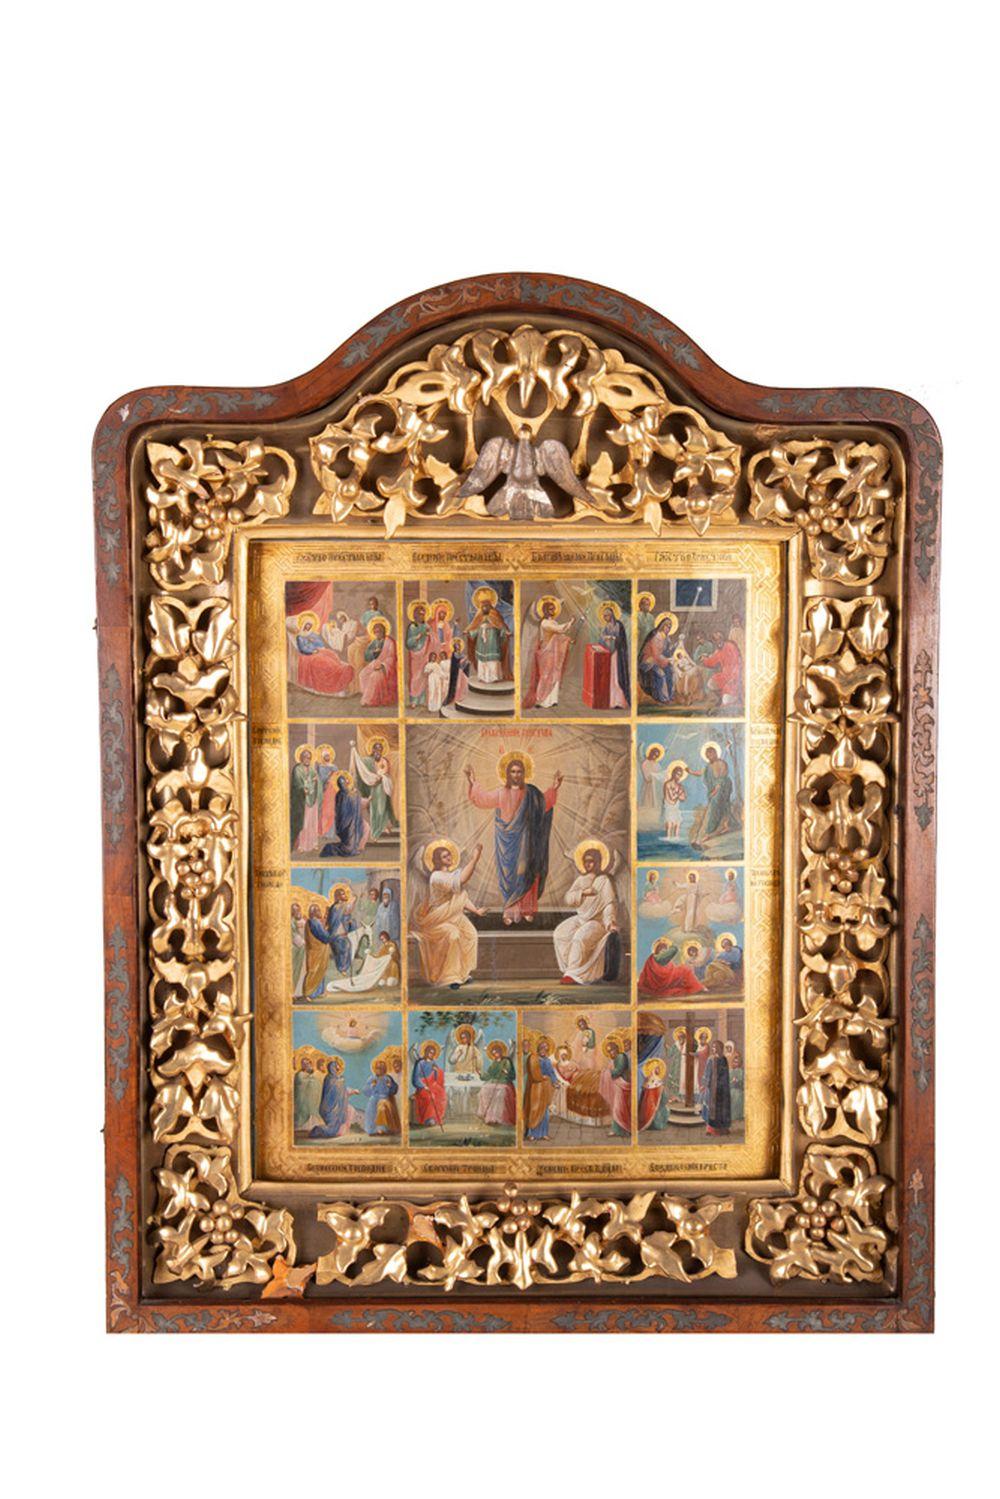 RUSSIAN GILT DECORATED ICONdepicting